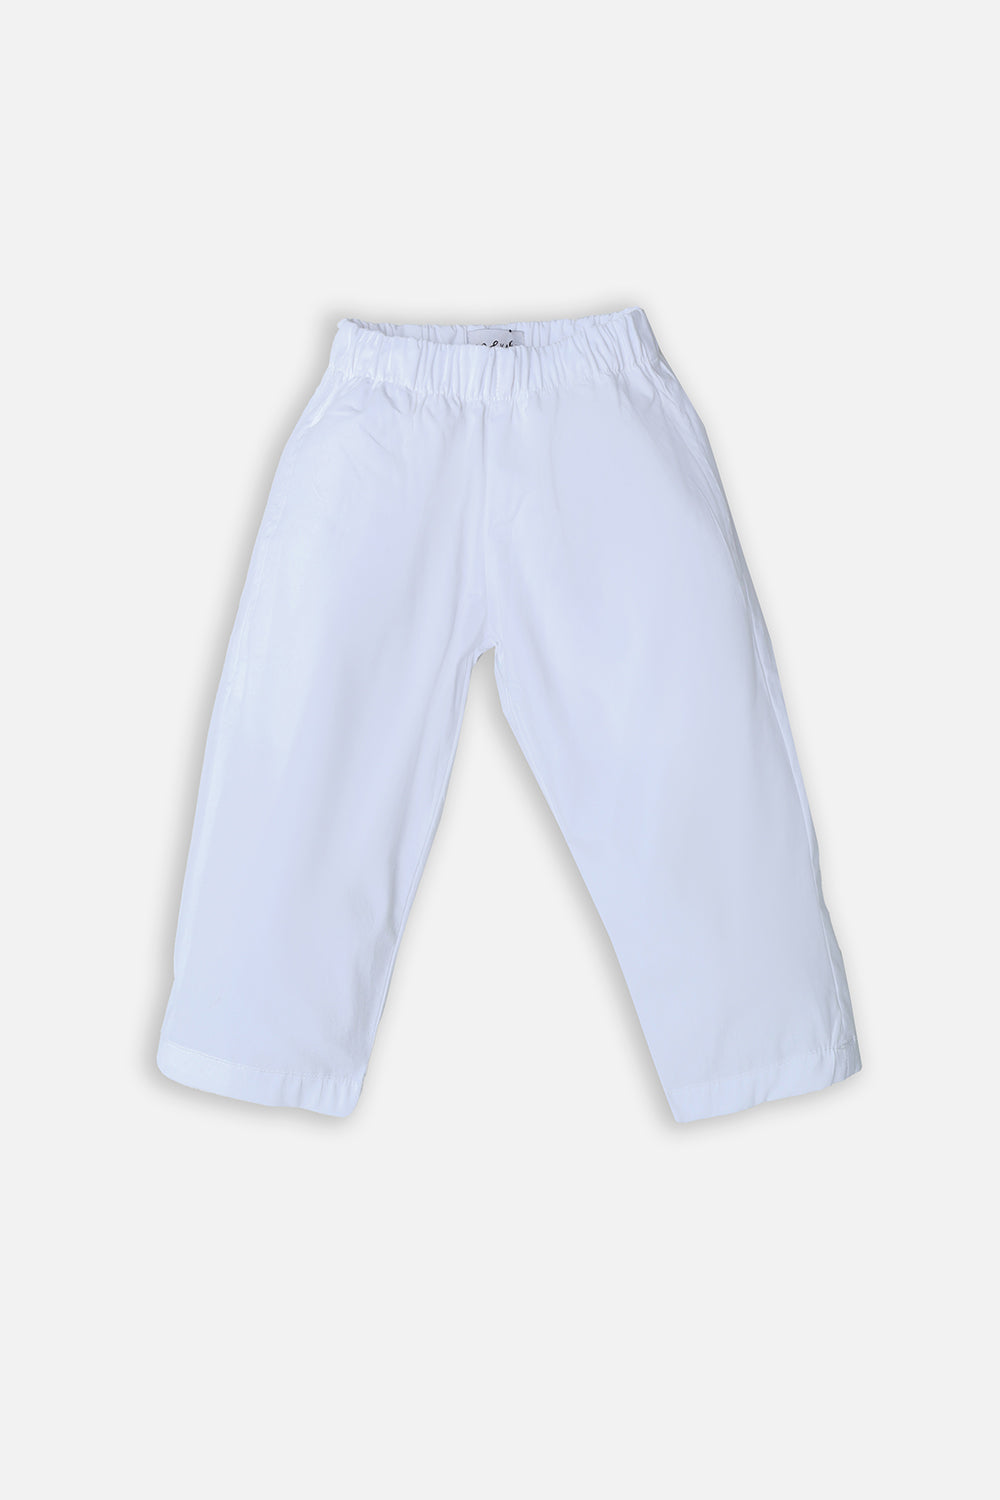 Plain trouser for boys with Side Pocket 100% Cotton fabric